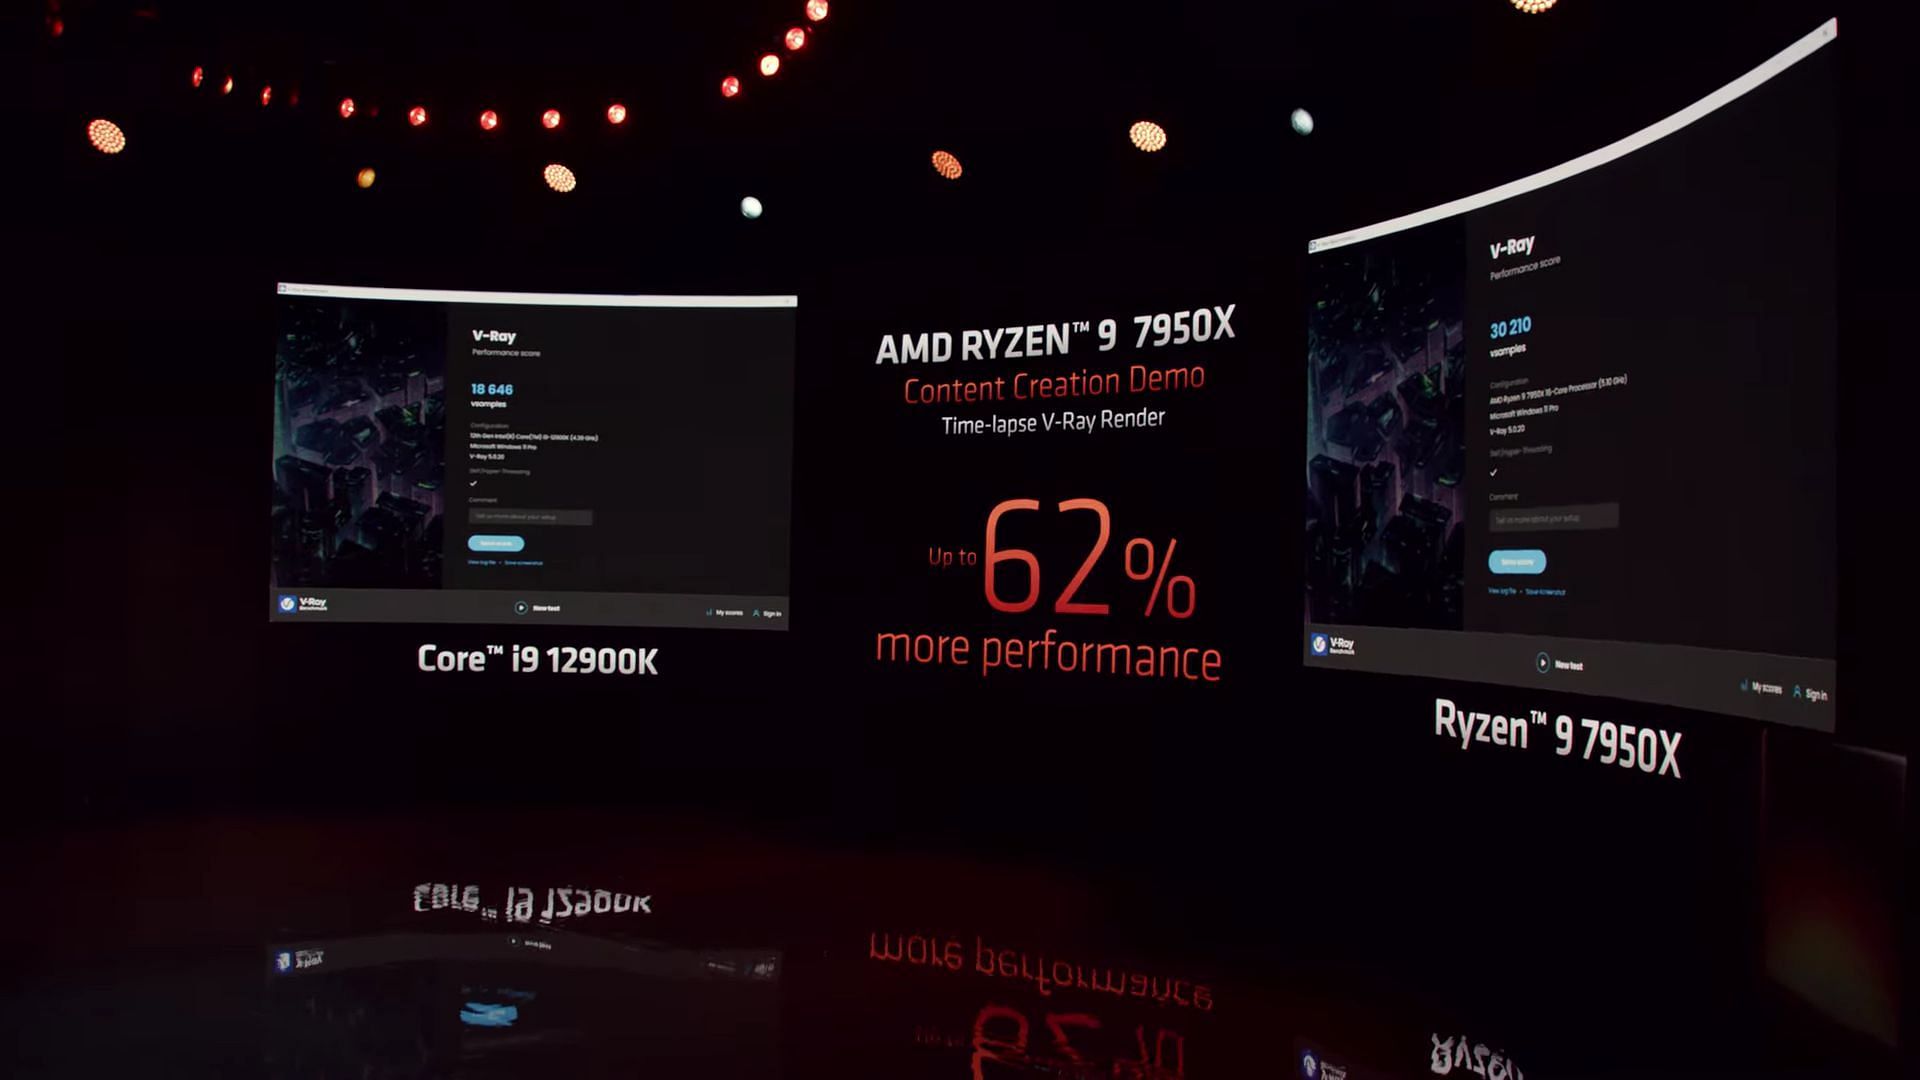 The Ryzen 9 7950X beats the Core i9 12900K by 62% in V-Ray rendering (Image via AMD on YouTube)